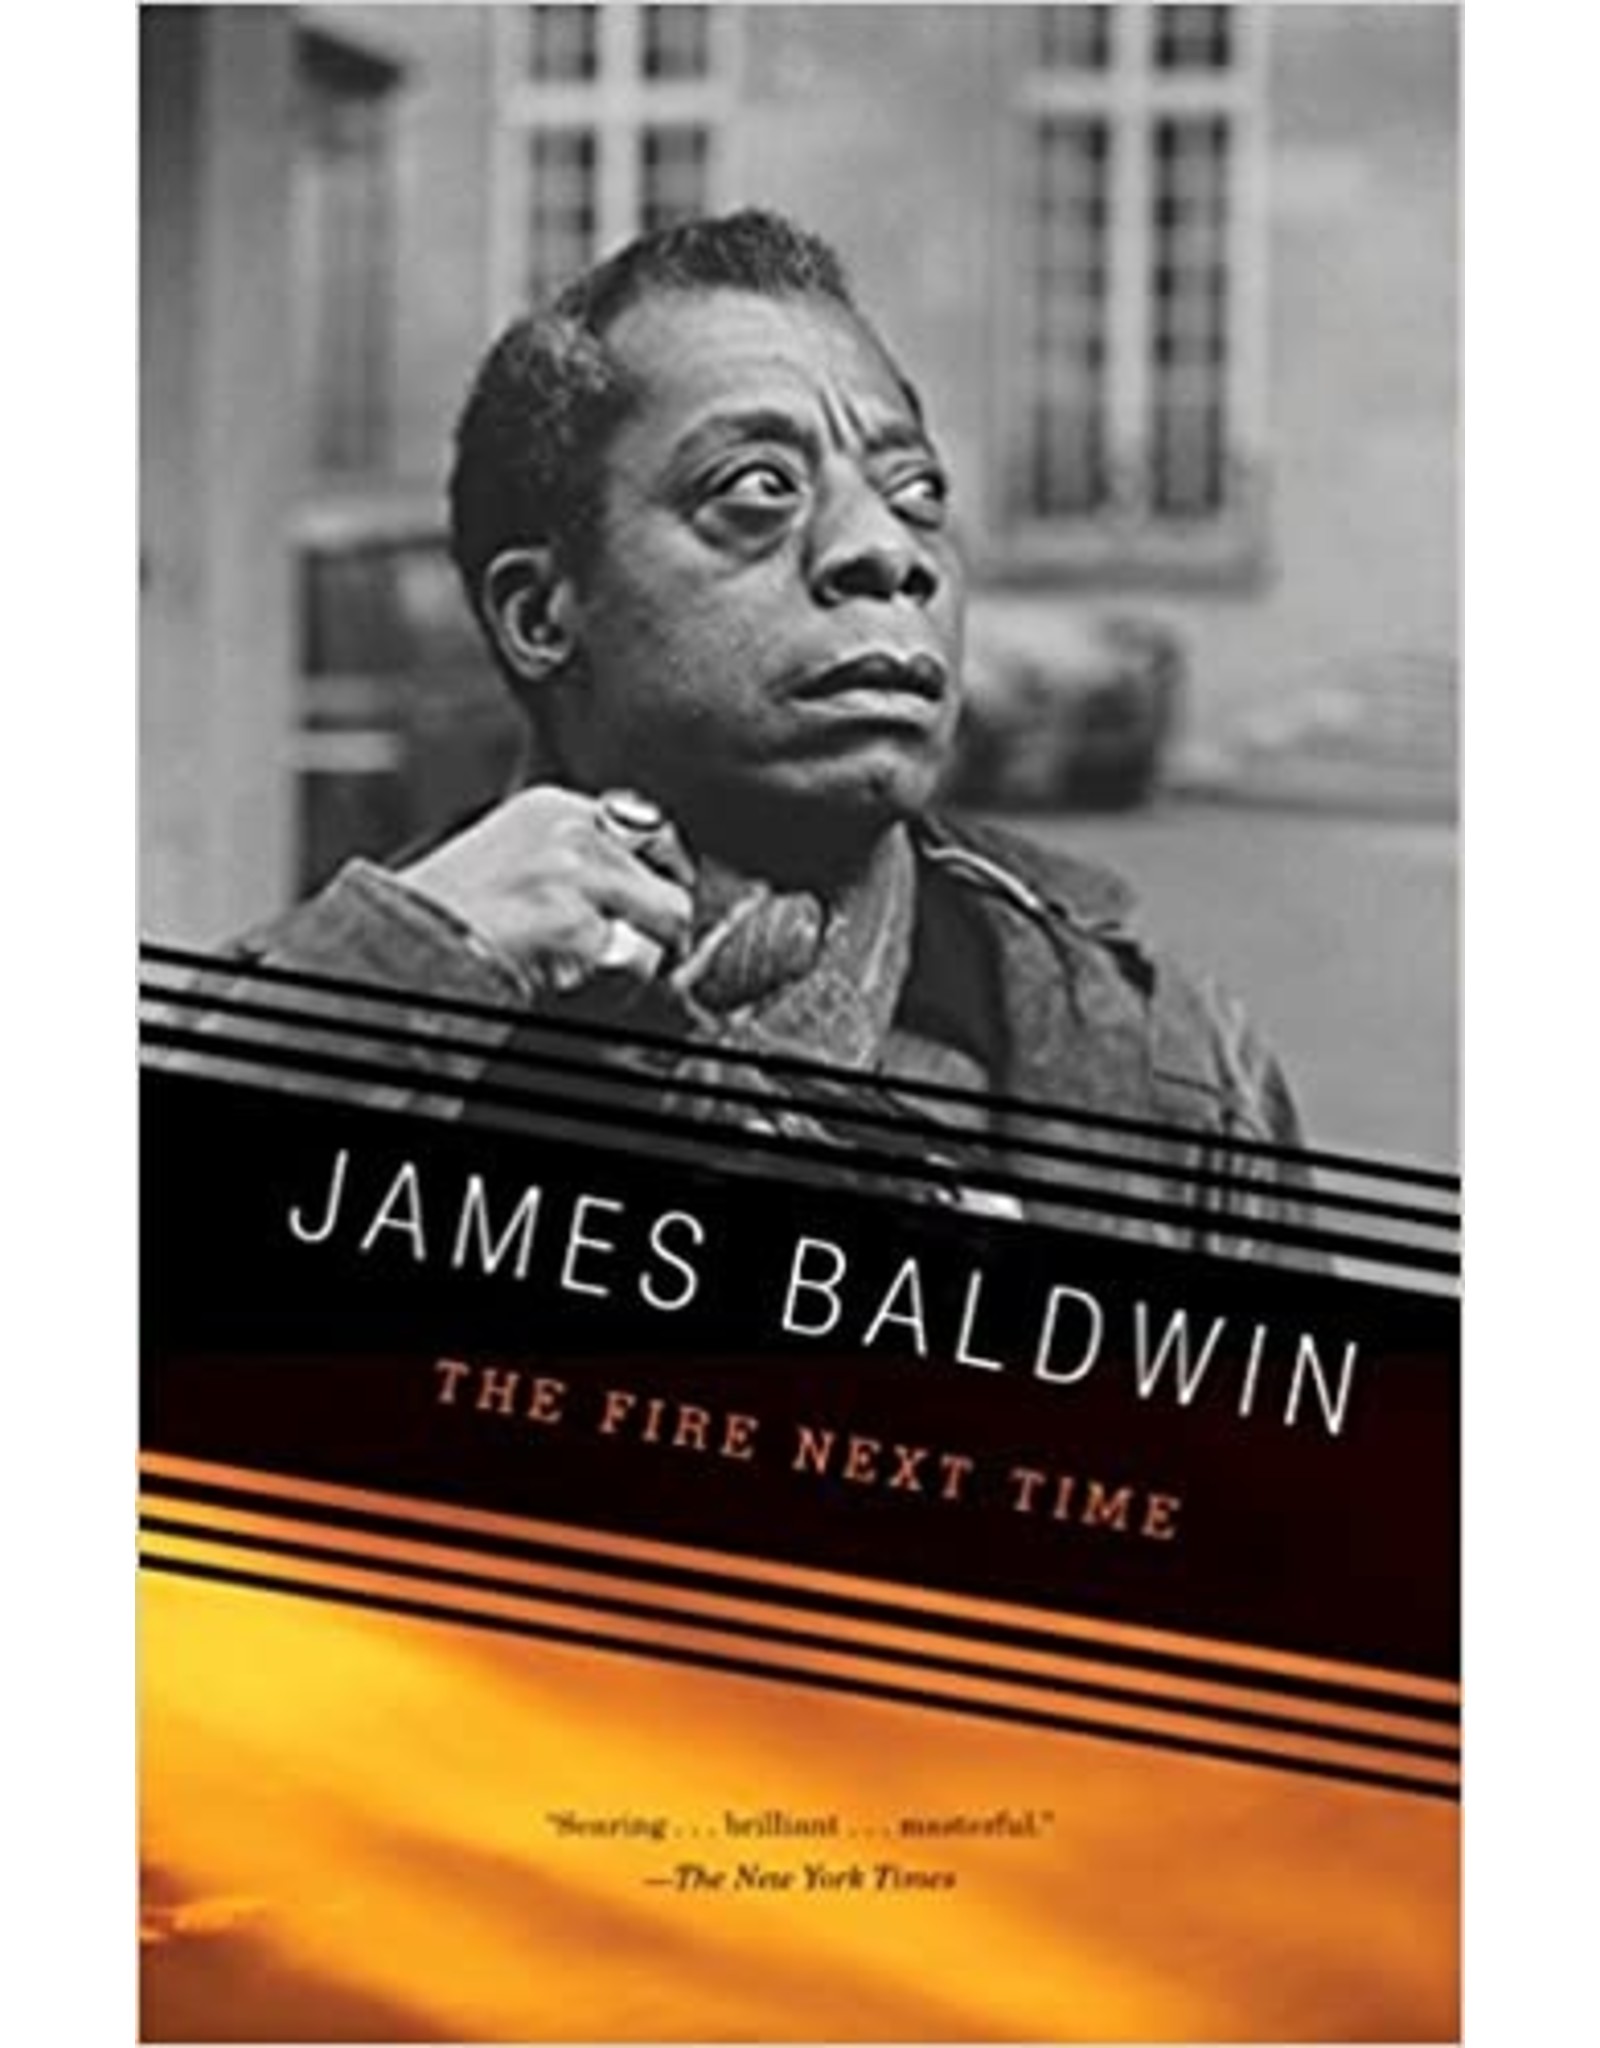 Non-Fiction: Civil Rights The Fire Next Time